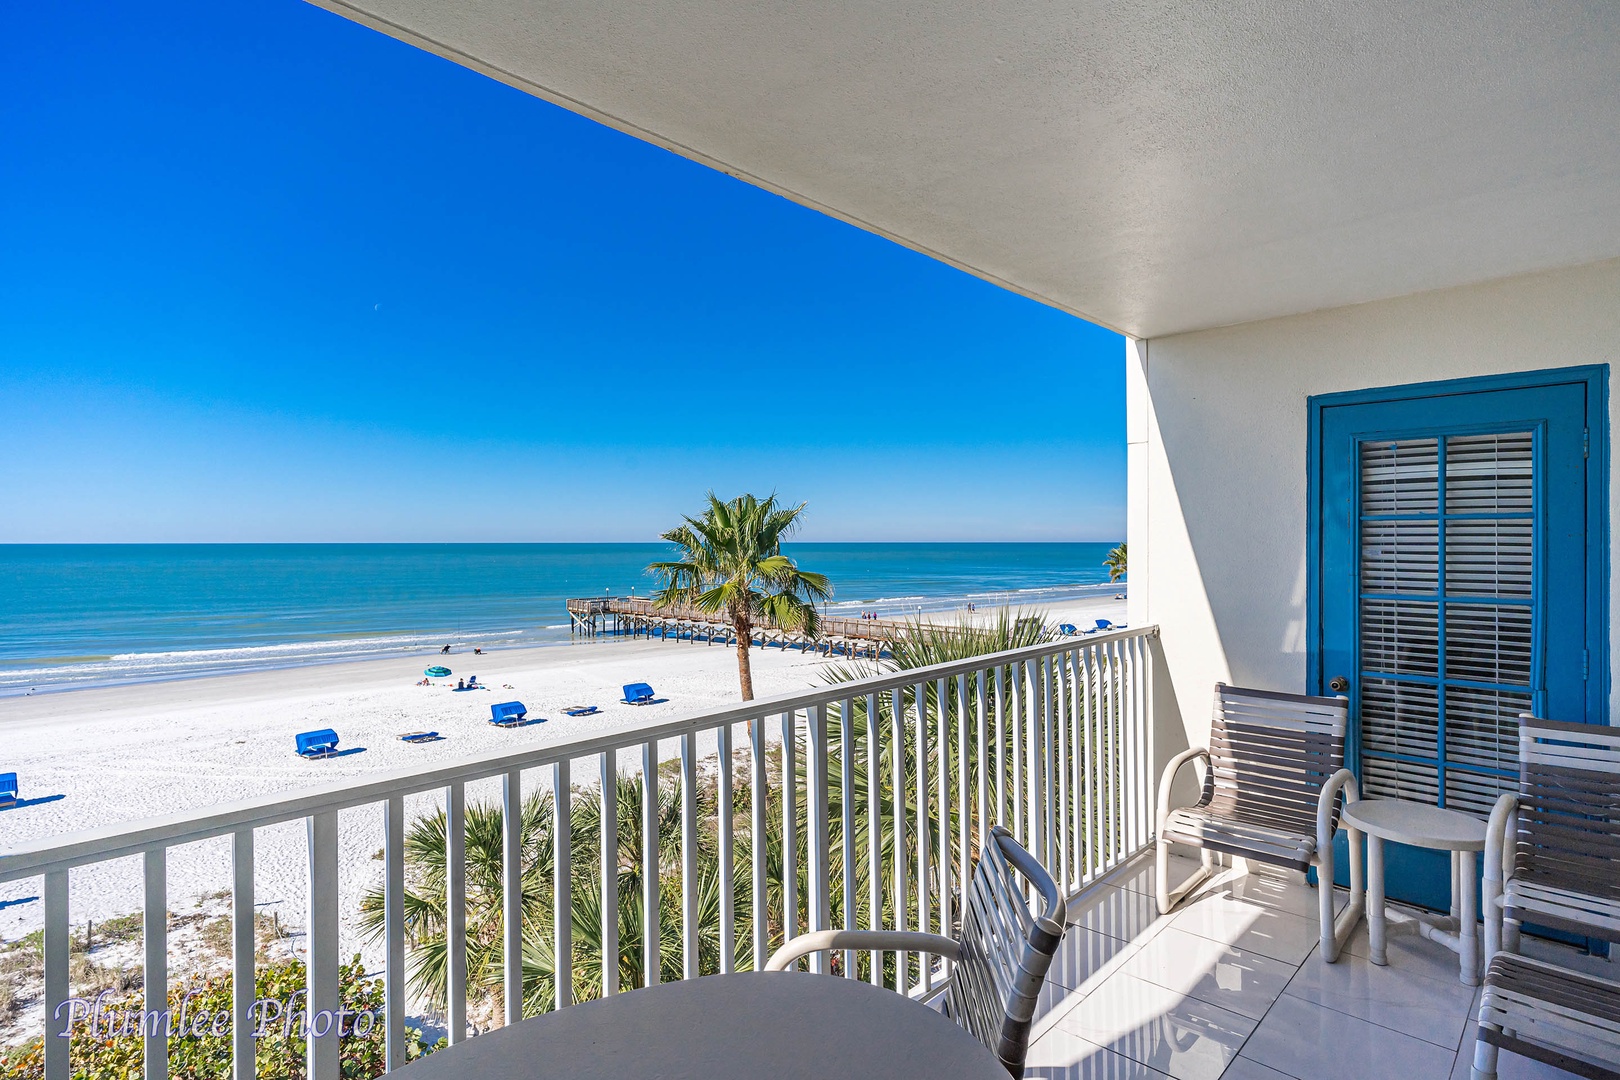 Private balcony on the Gulf of Mexico